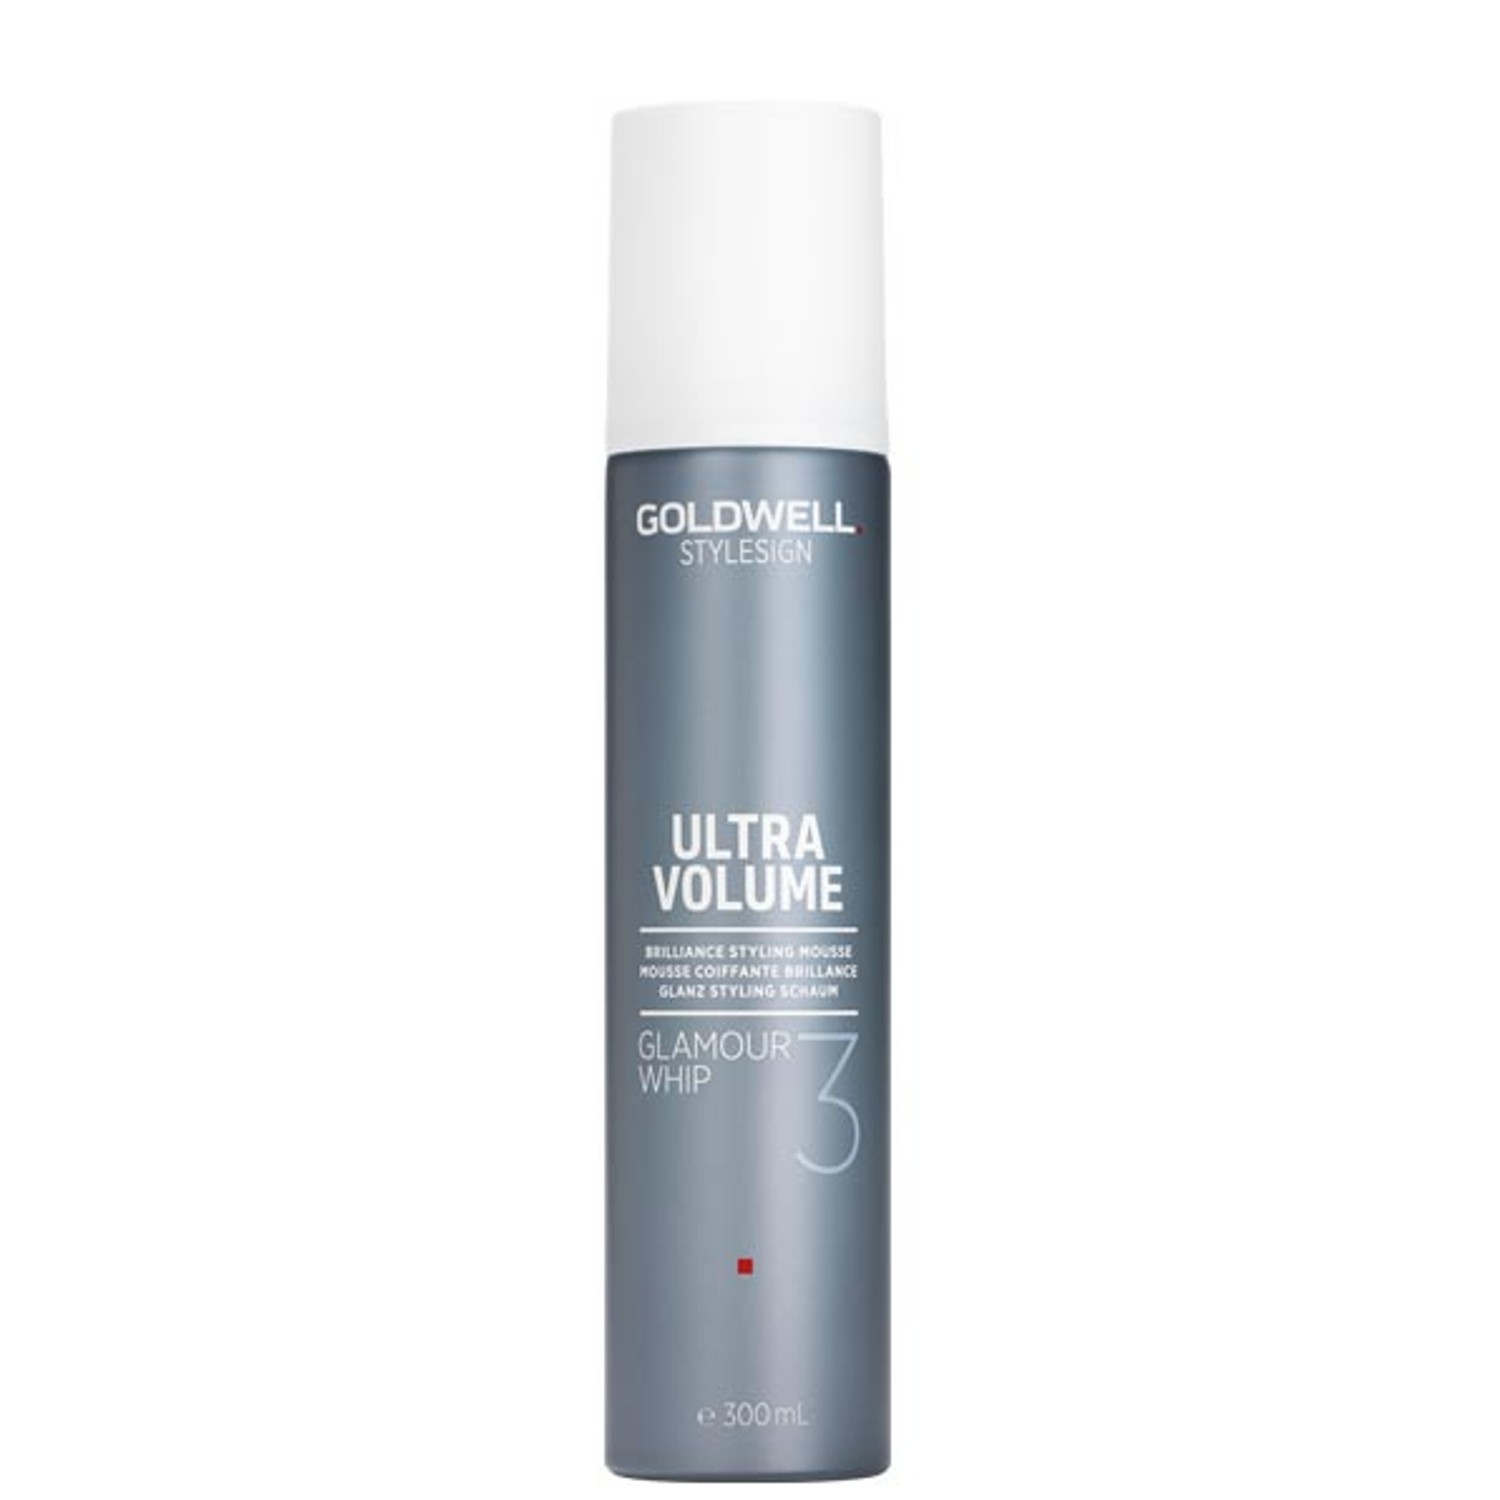 GOLDWELL Style Sign Ultra Volume GLAMOUR WHIP 300 ml